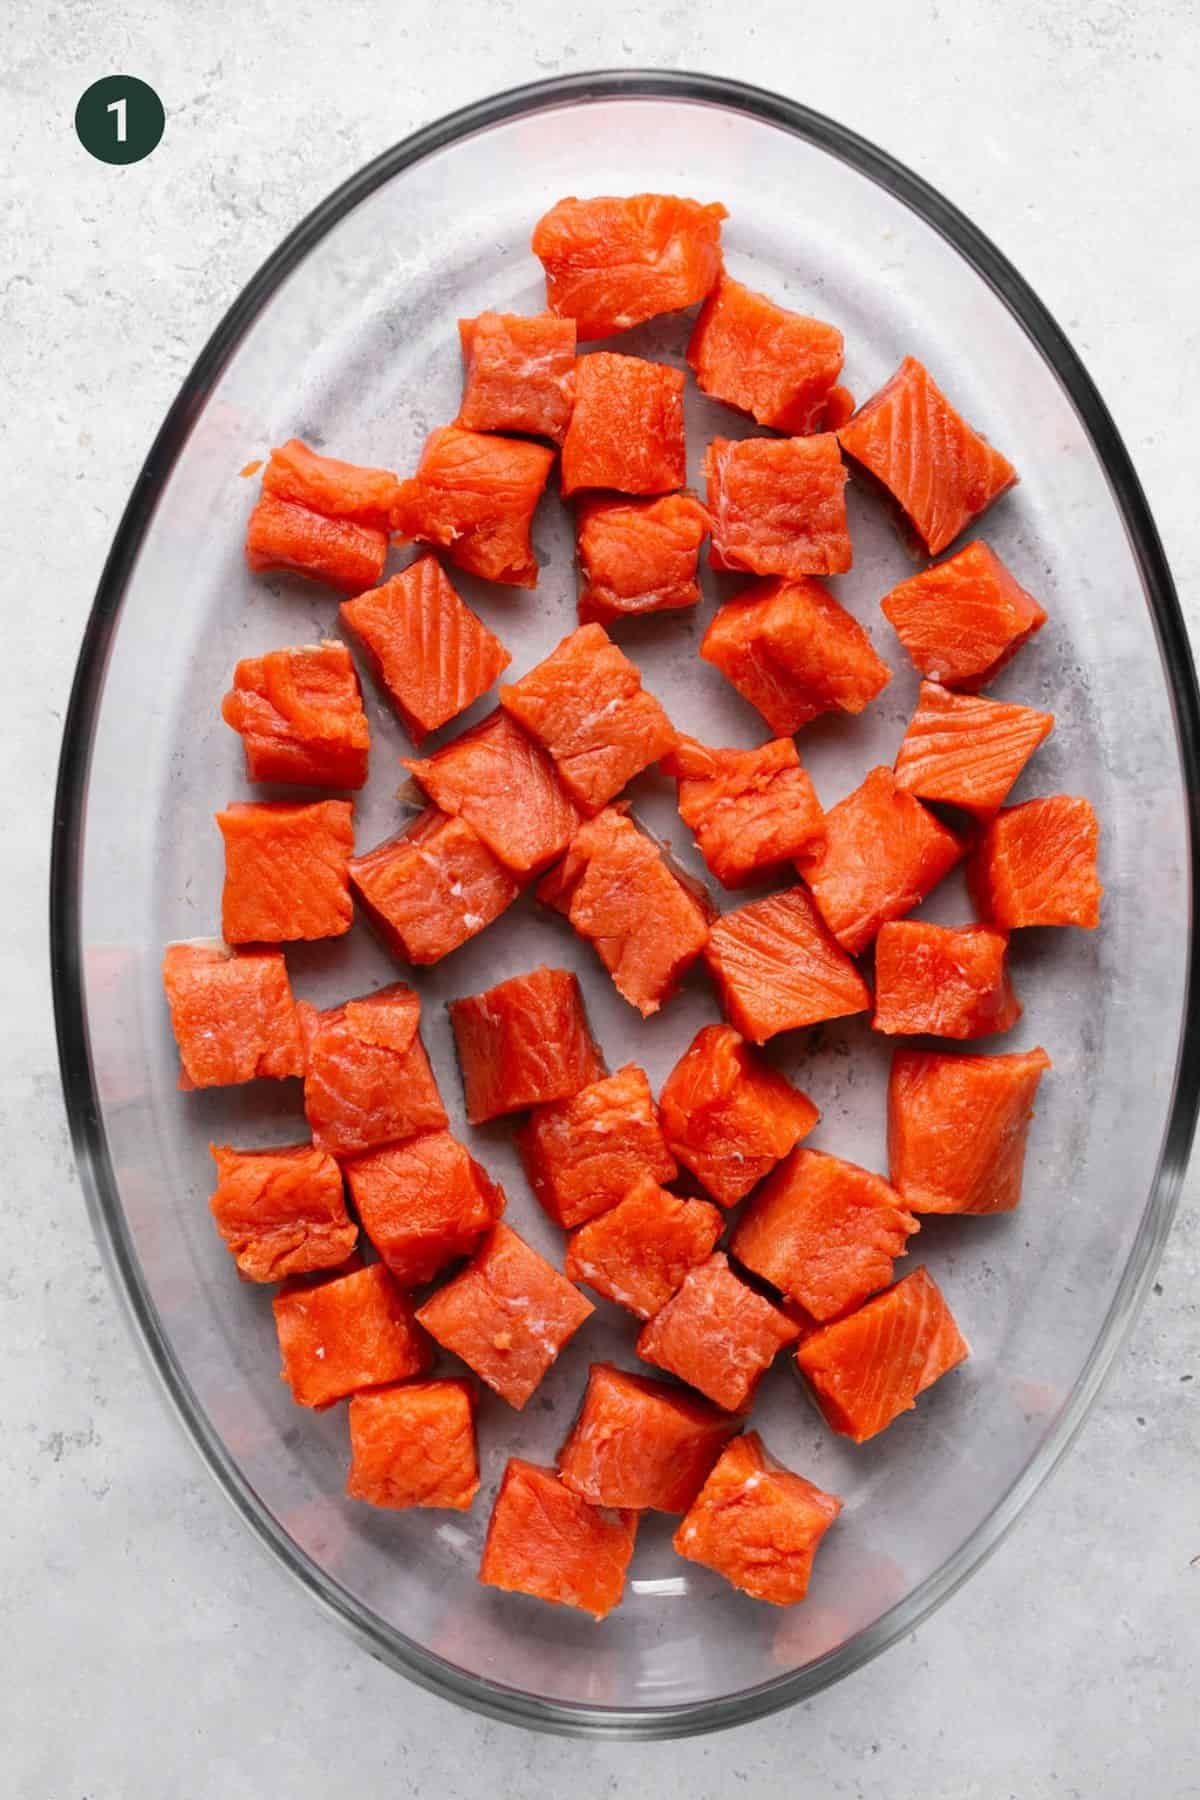 Raw wild caught salmon filet chopped into one inch squares on a glass plate.